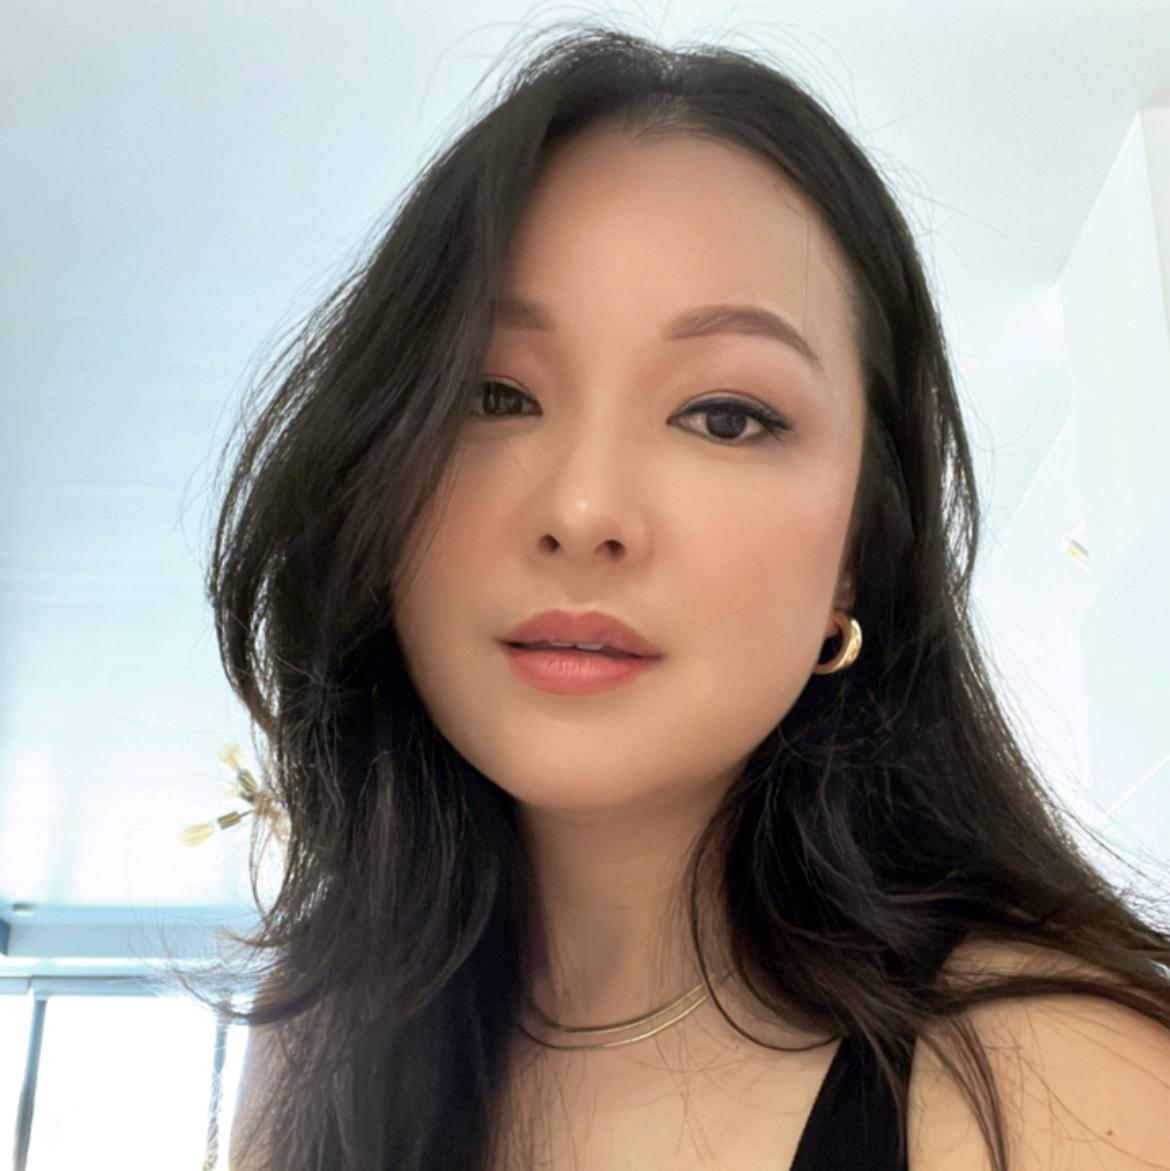 Charlet Chung's images